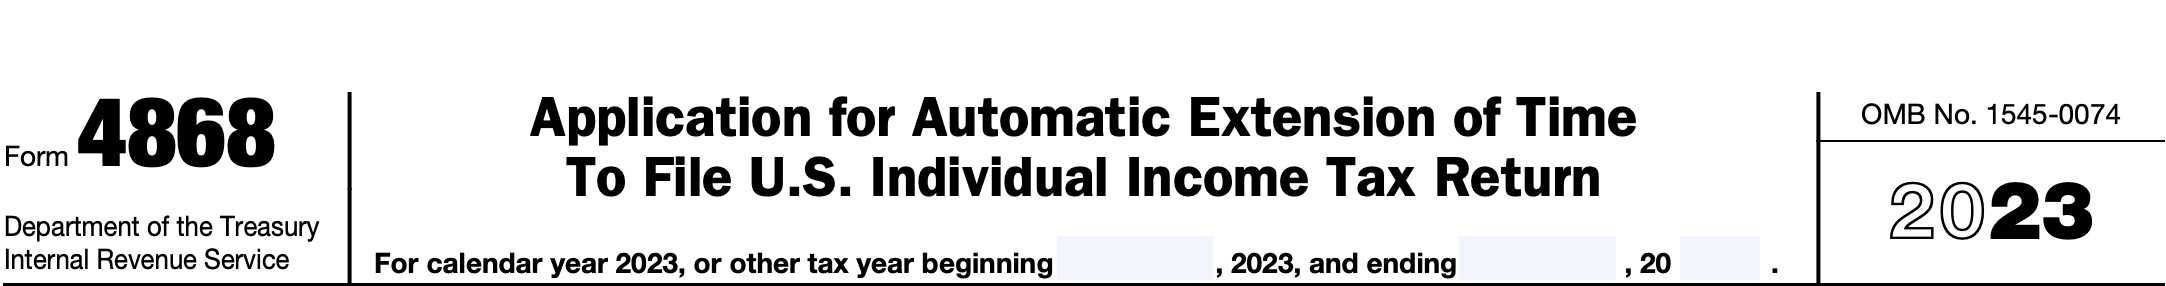 irs form 4868, application for automatic extension of time to file U.S. individual income tax return - information fields for fiscal year filers